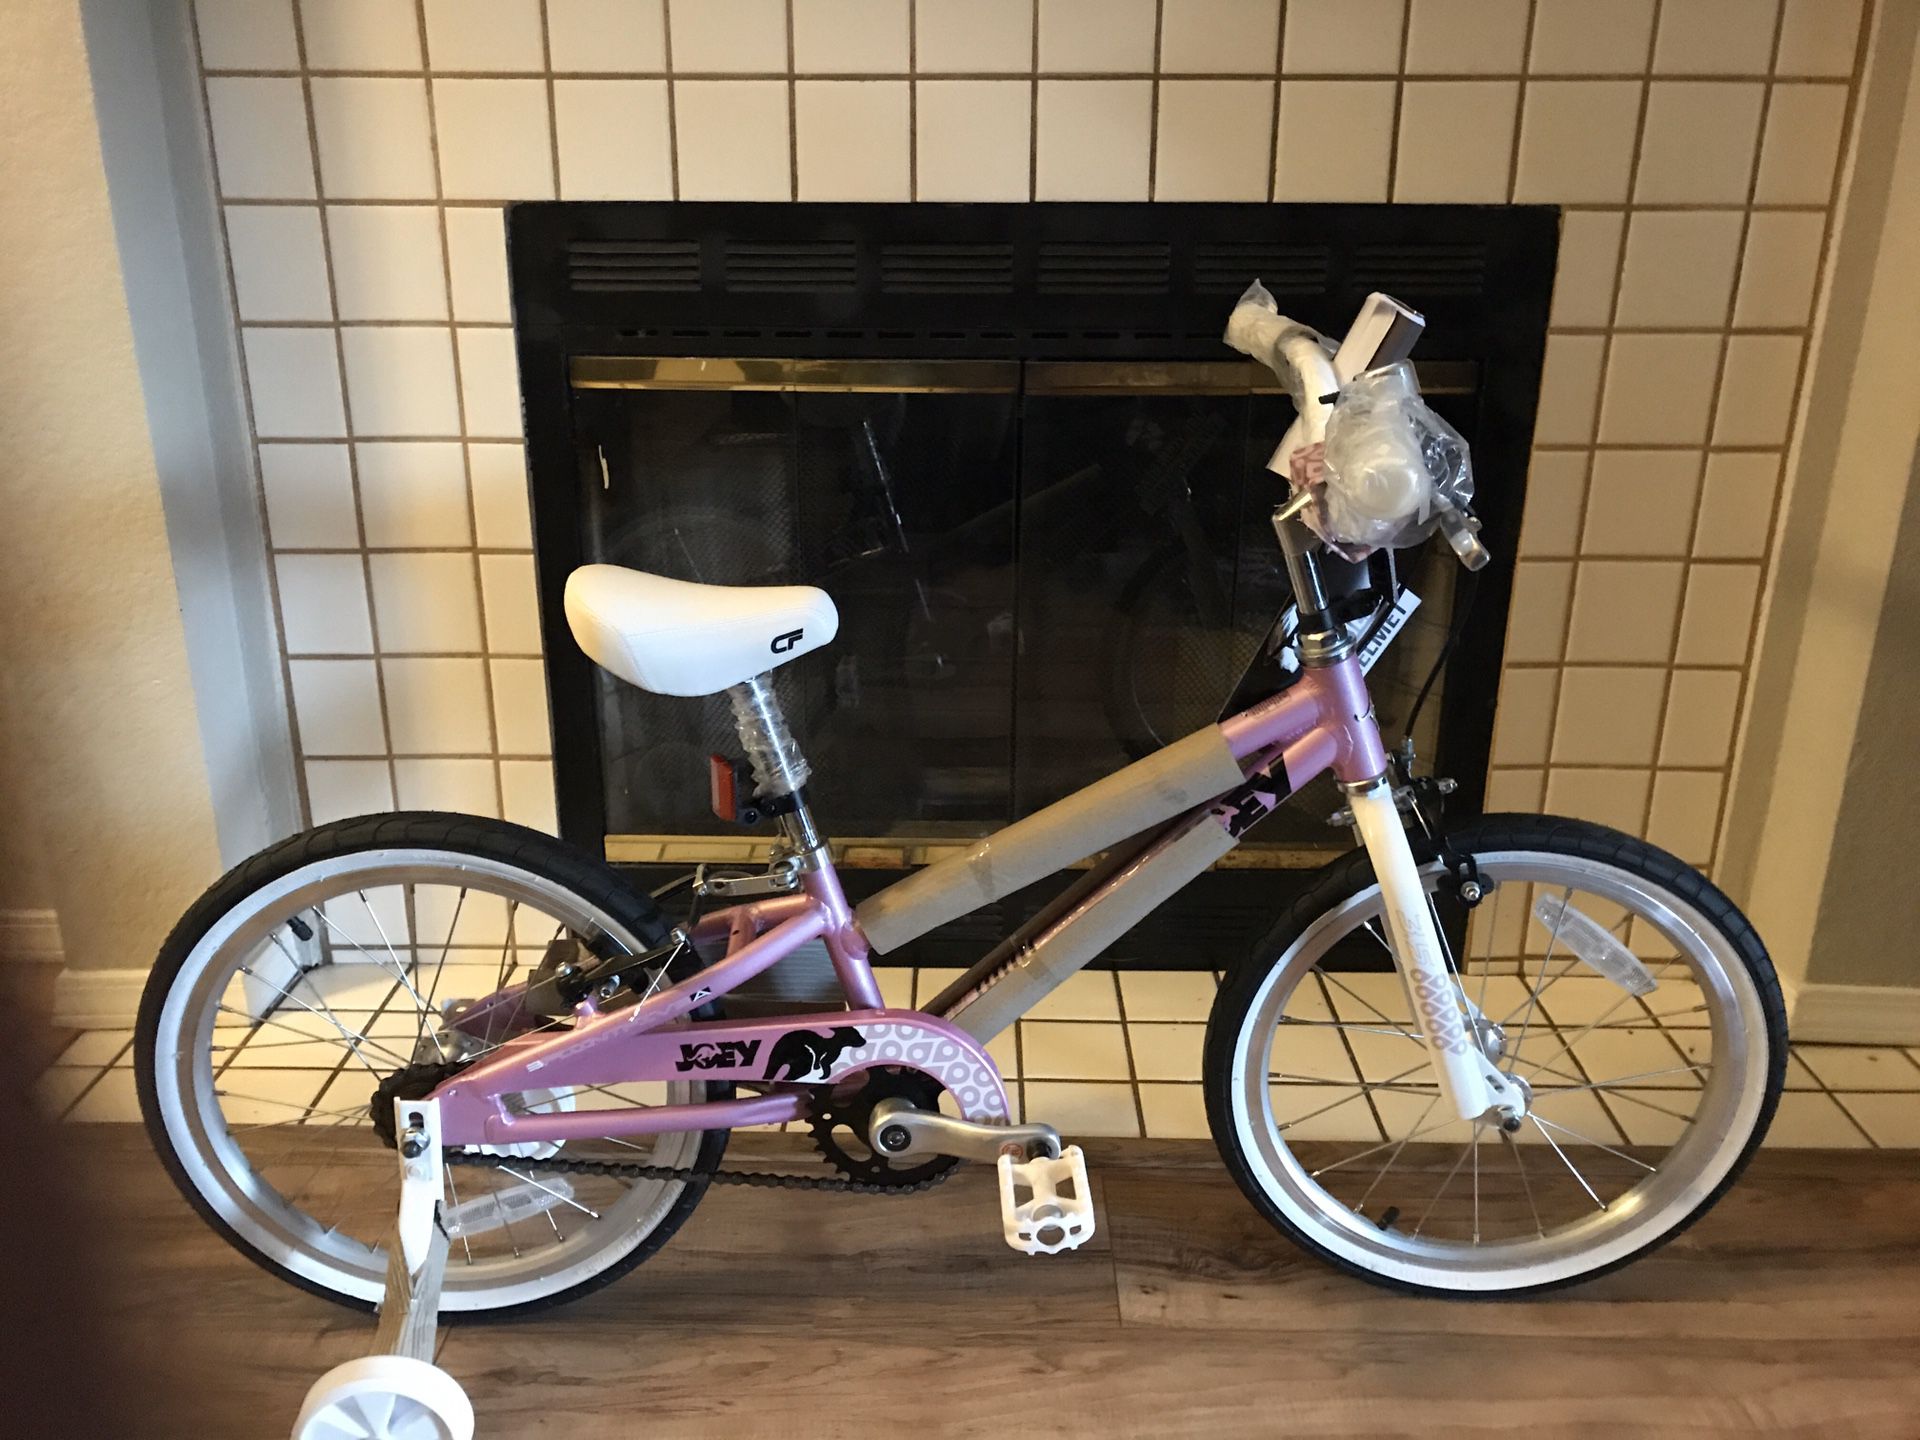 New (out of the box) Girl joey bike